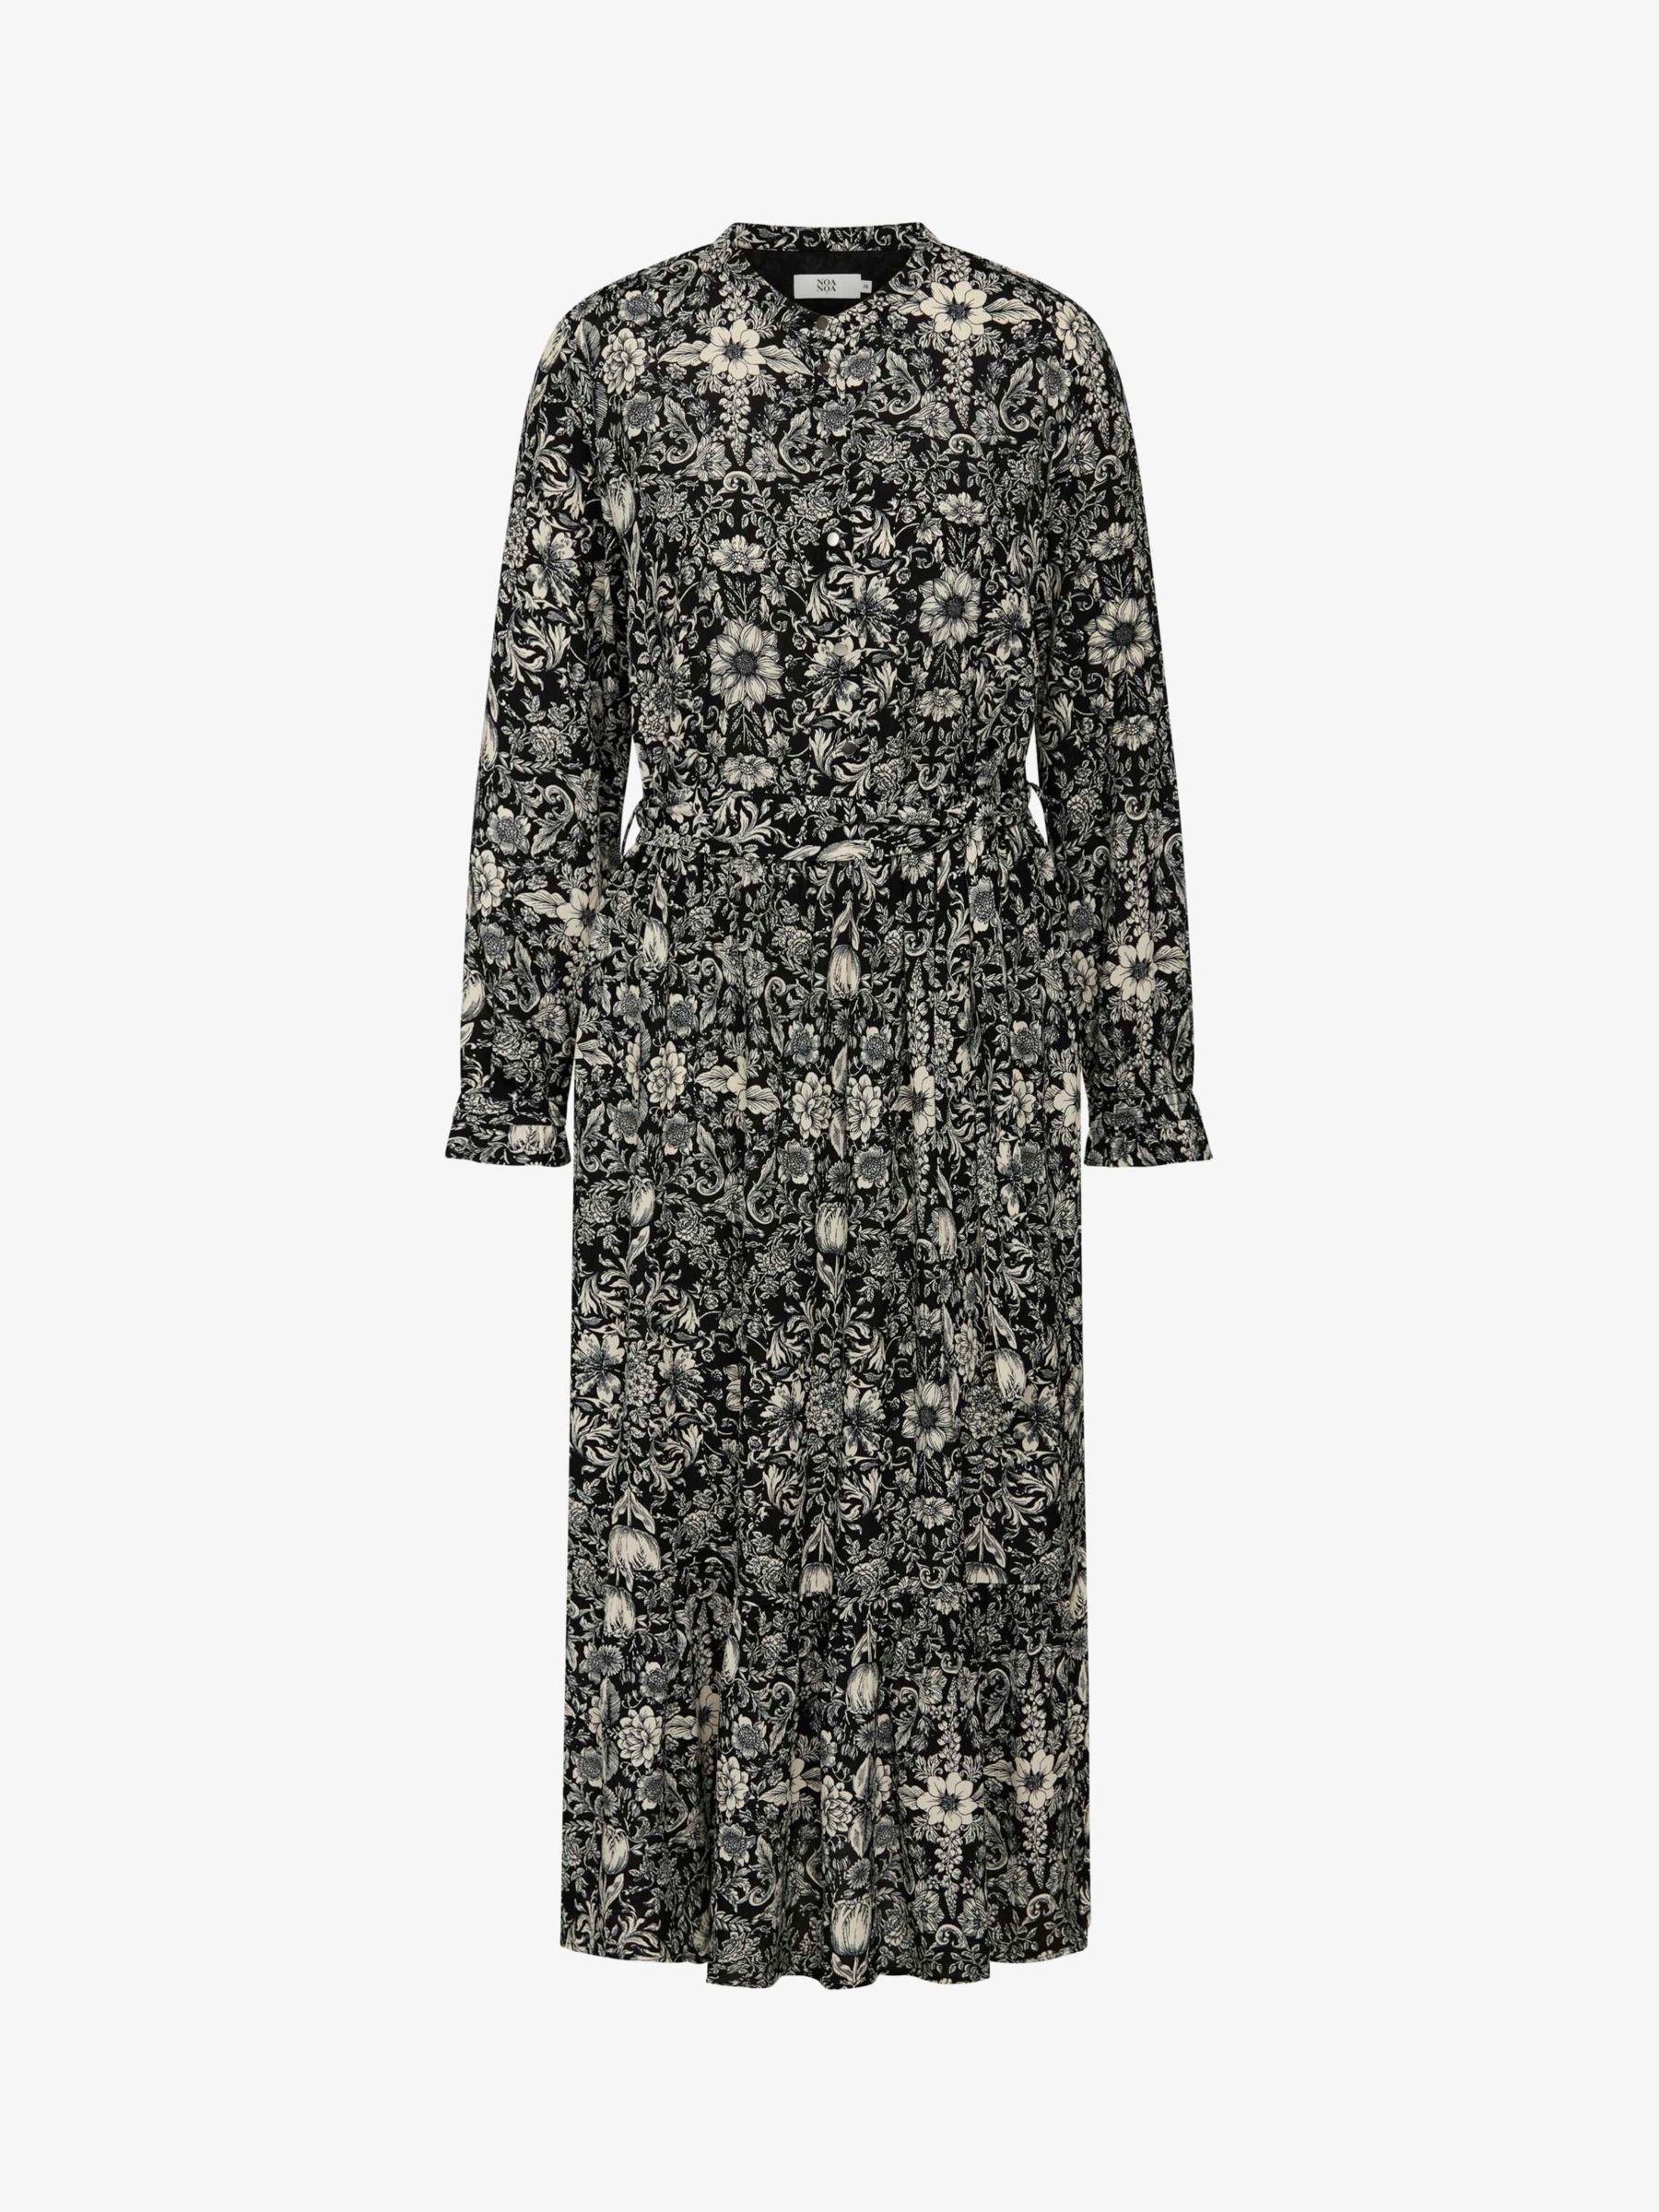 Buy Noa Noa Louise Floral Tapestry Print Tiered Maxi Dress, Black/Off White Online at johnlewis.com